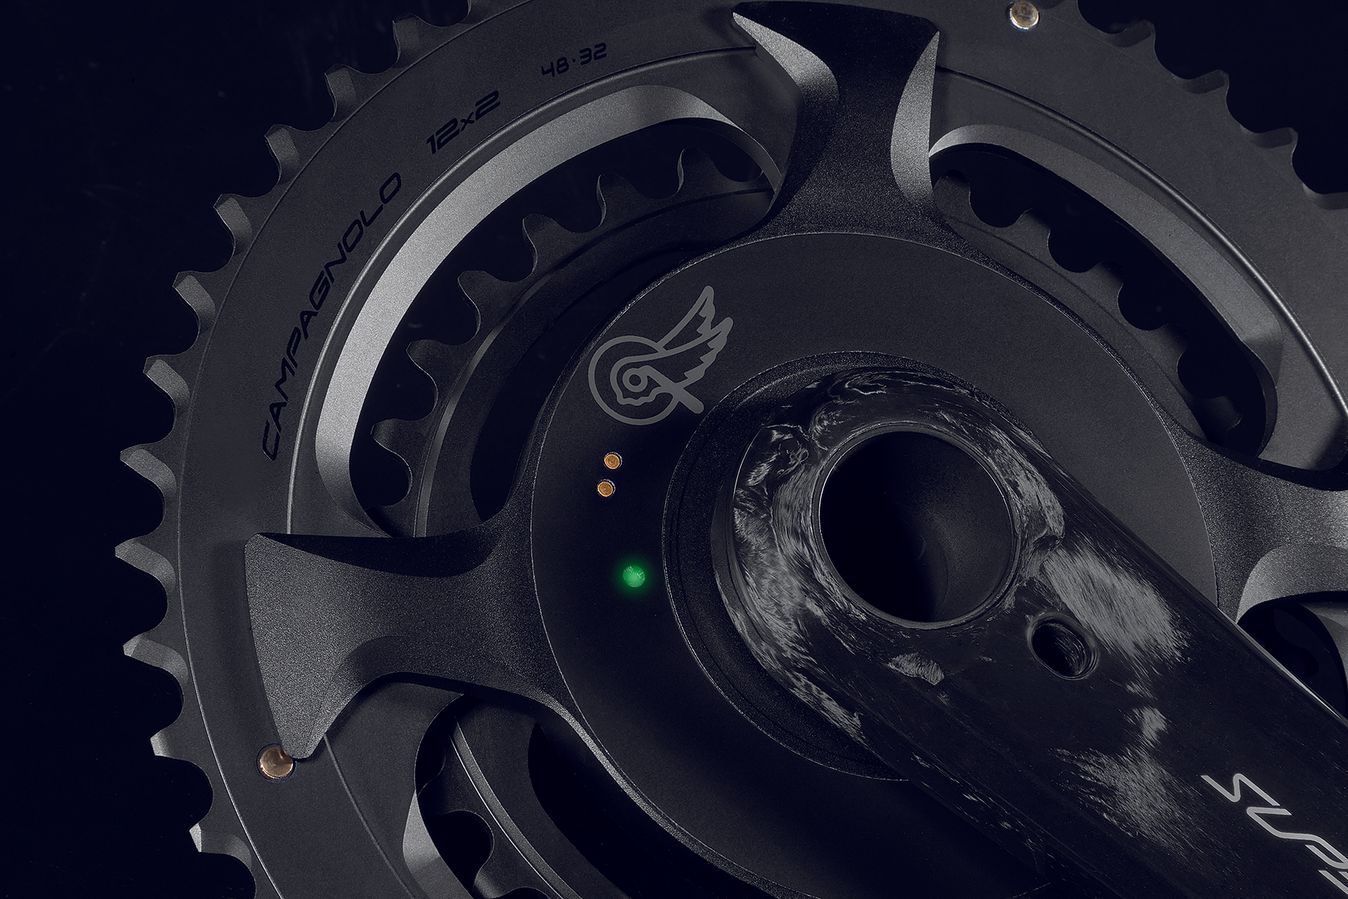 A closer look at the new power meter